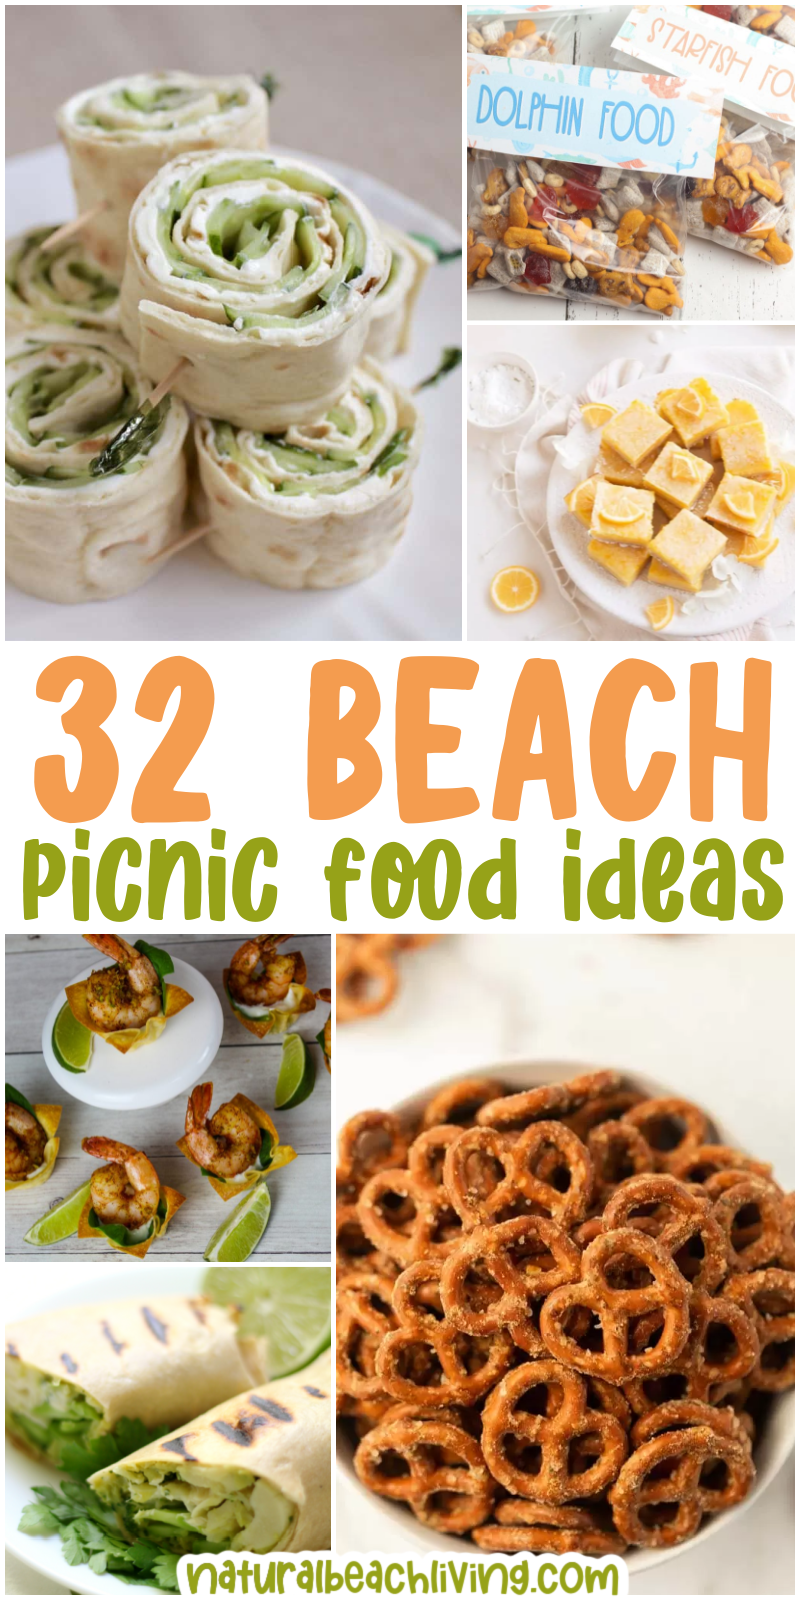 Make a few of these Beach Picnic Food Ideas to pack for a delicious lunch, Find easy main dishes, side dishes, treats, sweets, and more for a fun day at the beach with your family,  friends, or on a date. These picnic lunch ideas for the beach are just what you need this summer. 